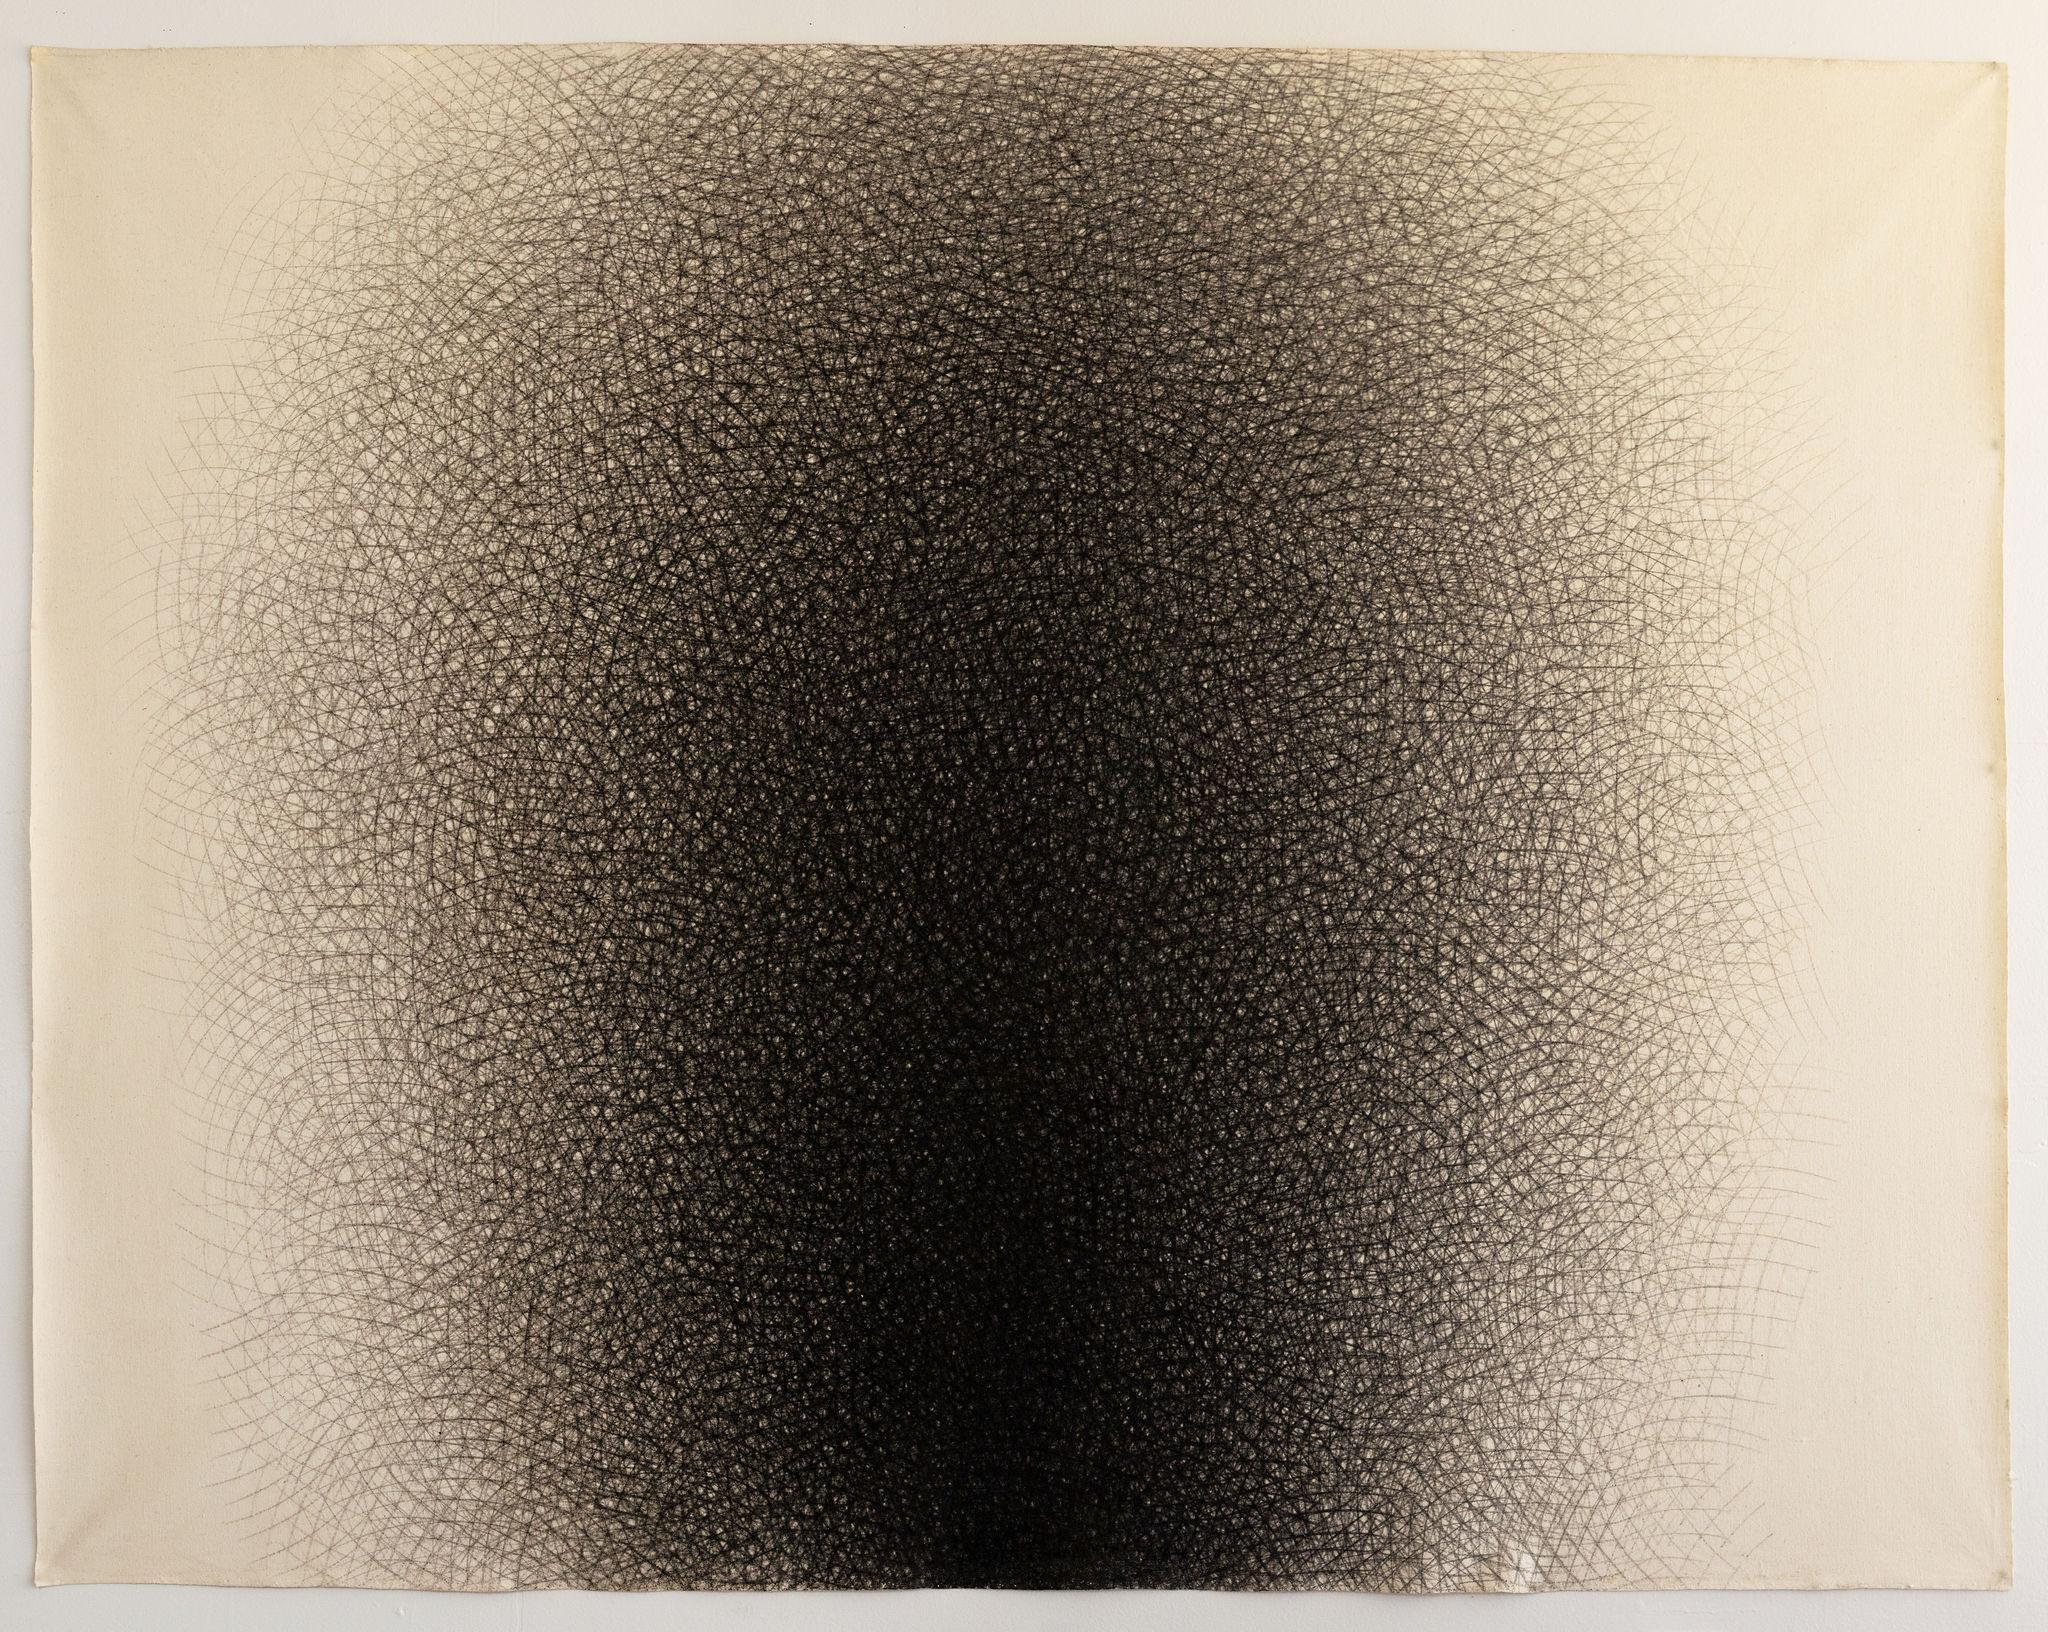 Jack Scott Abstract Drawing - "Black Rest" Charcoal Cross-Hatch Drawing on Canvas 1977